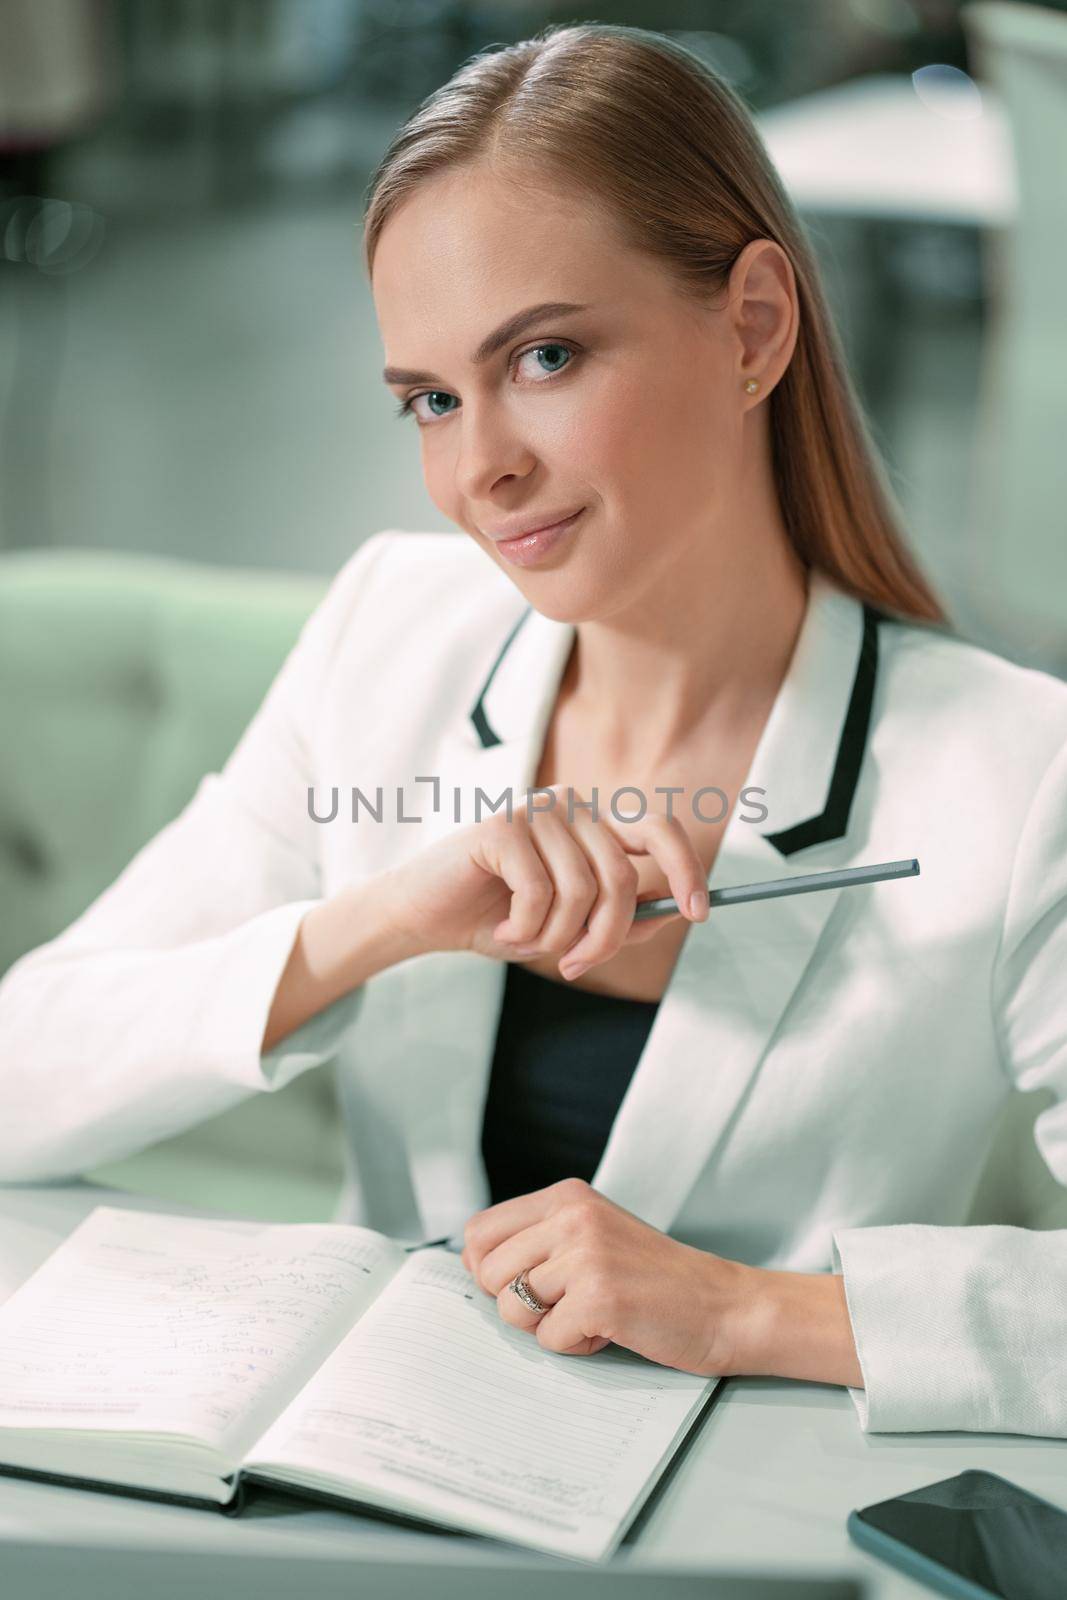 Beautiful businesswoman in white jacket looking at camera making notes in her scheduler or journal sitting in front at the modern bright office. Office worker looking at her working place. 